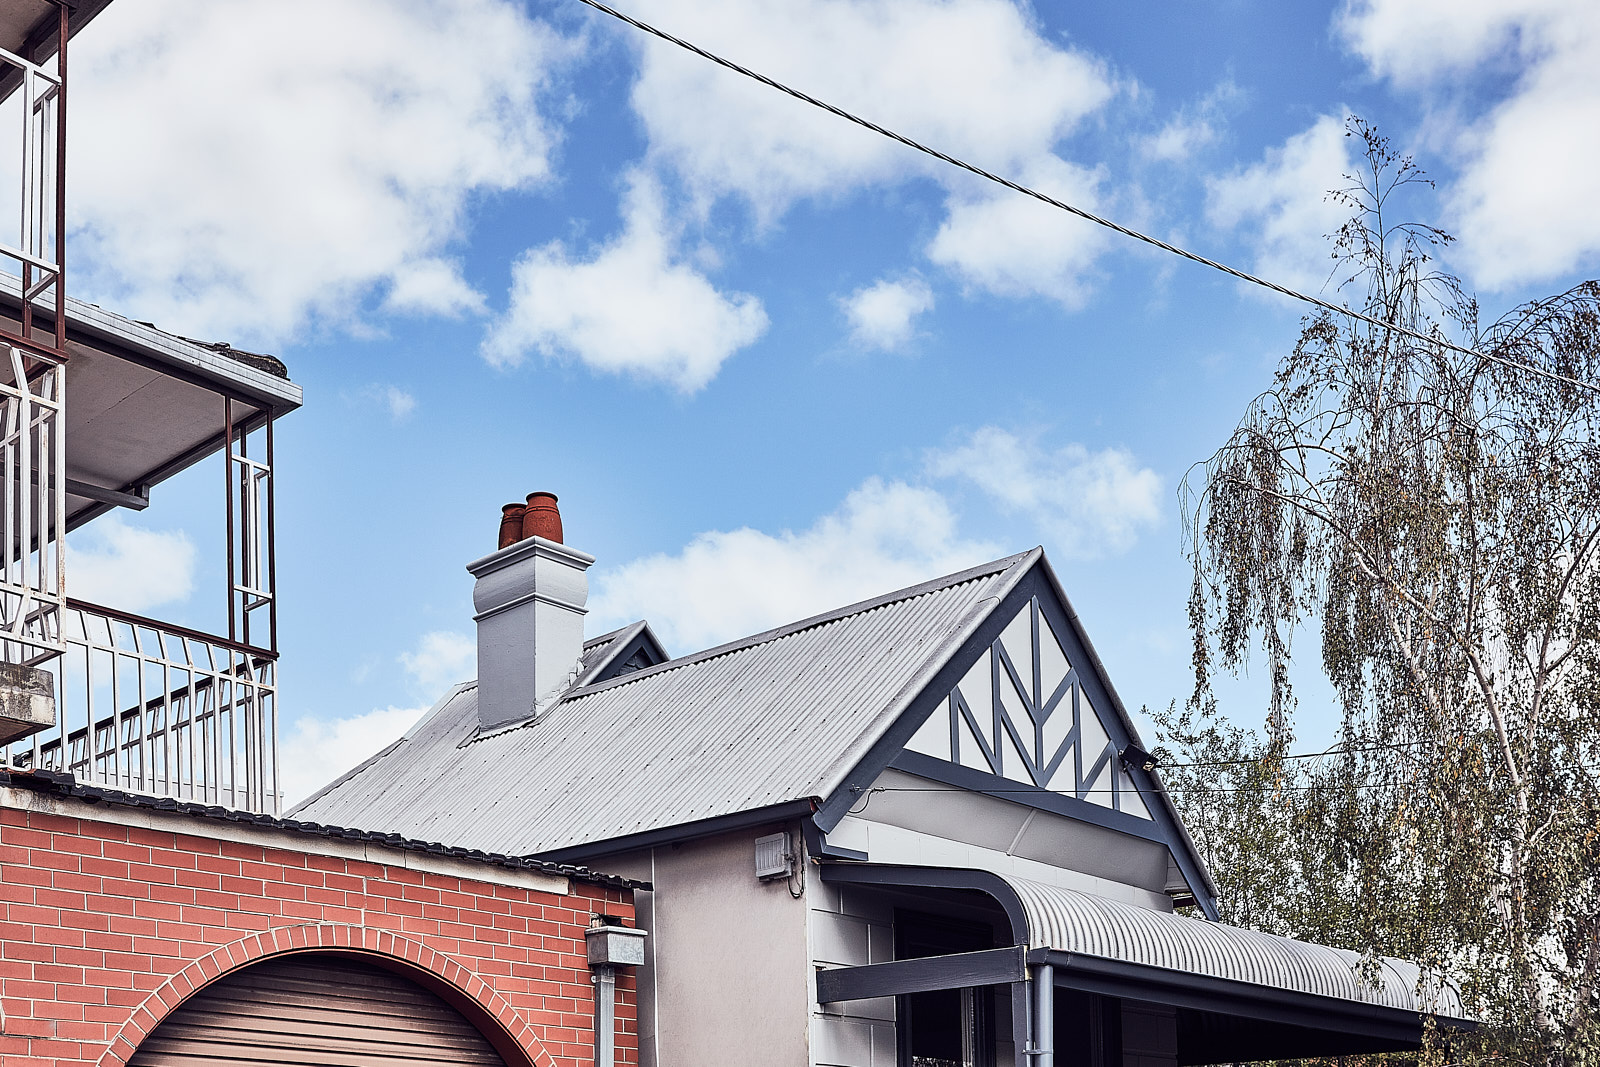 Melbourne’s Love Story with Terrace Homes.